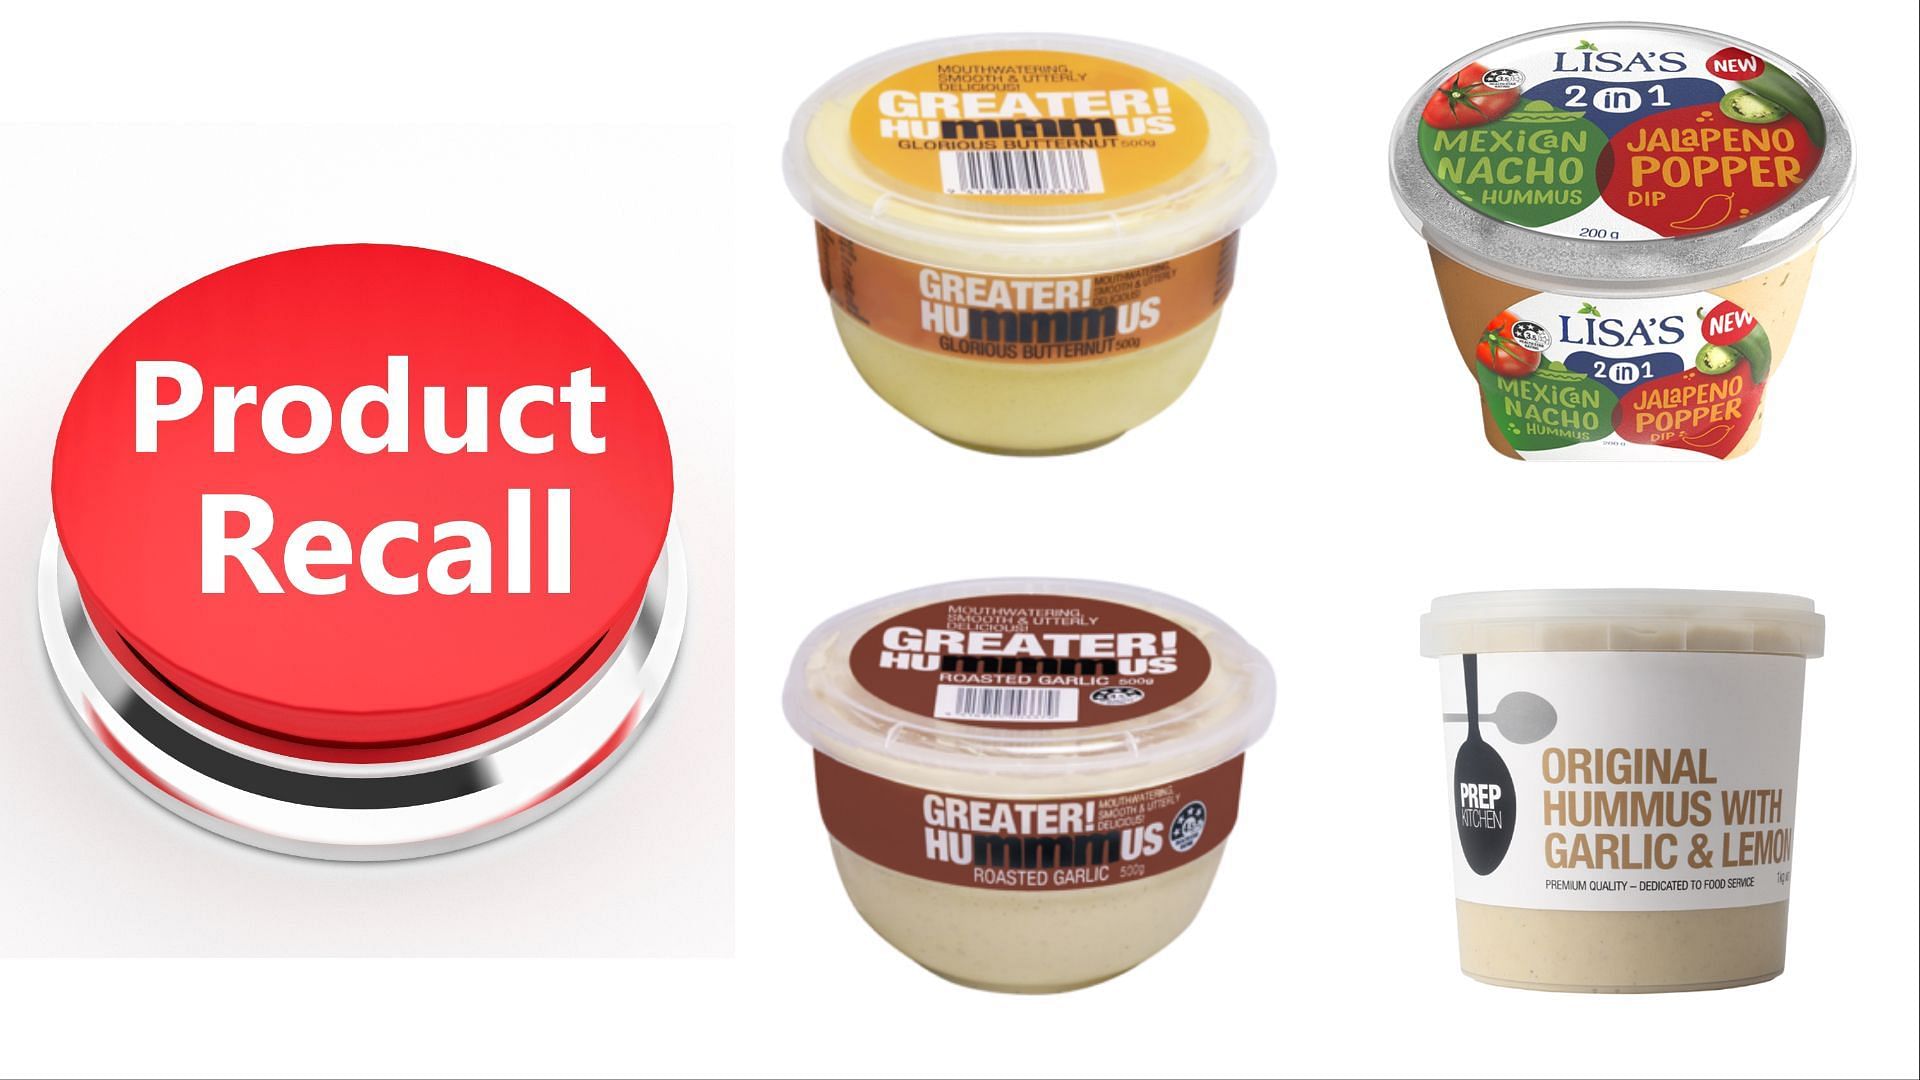 More than 21 Hummus and Tahini products produced by Life Health Foods NZ Ltd and Brelita Foods Ltd recalled over Salmonella concerns (Image via MPI)